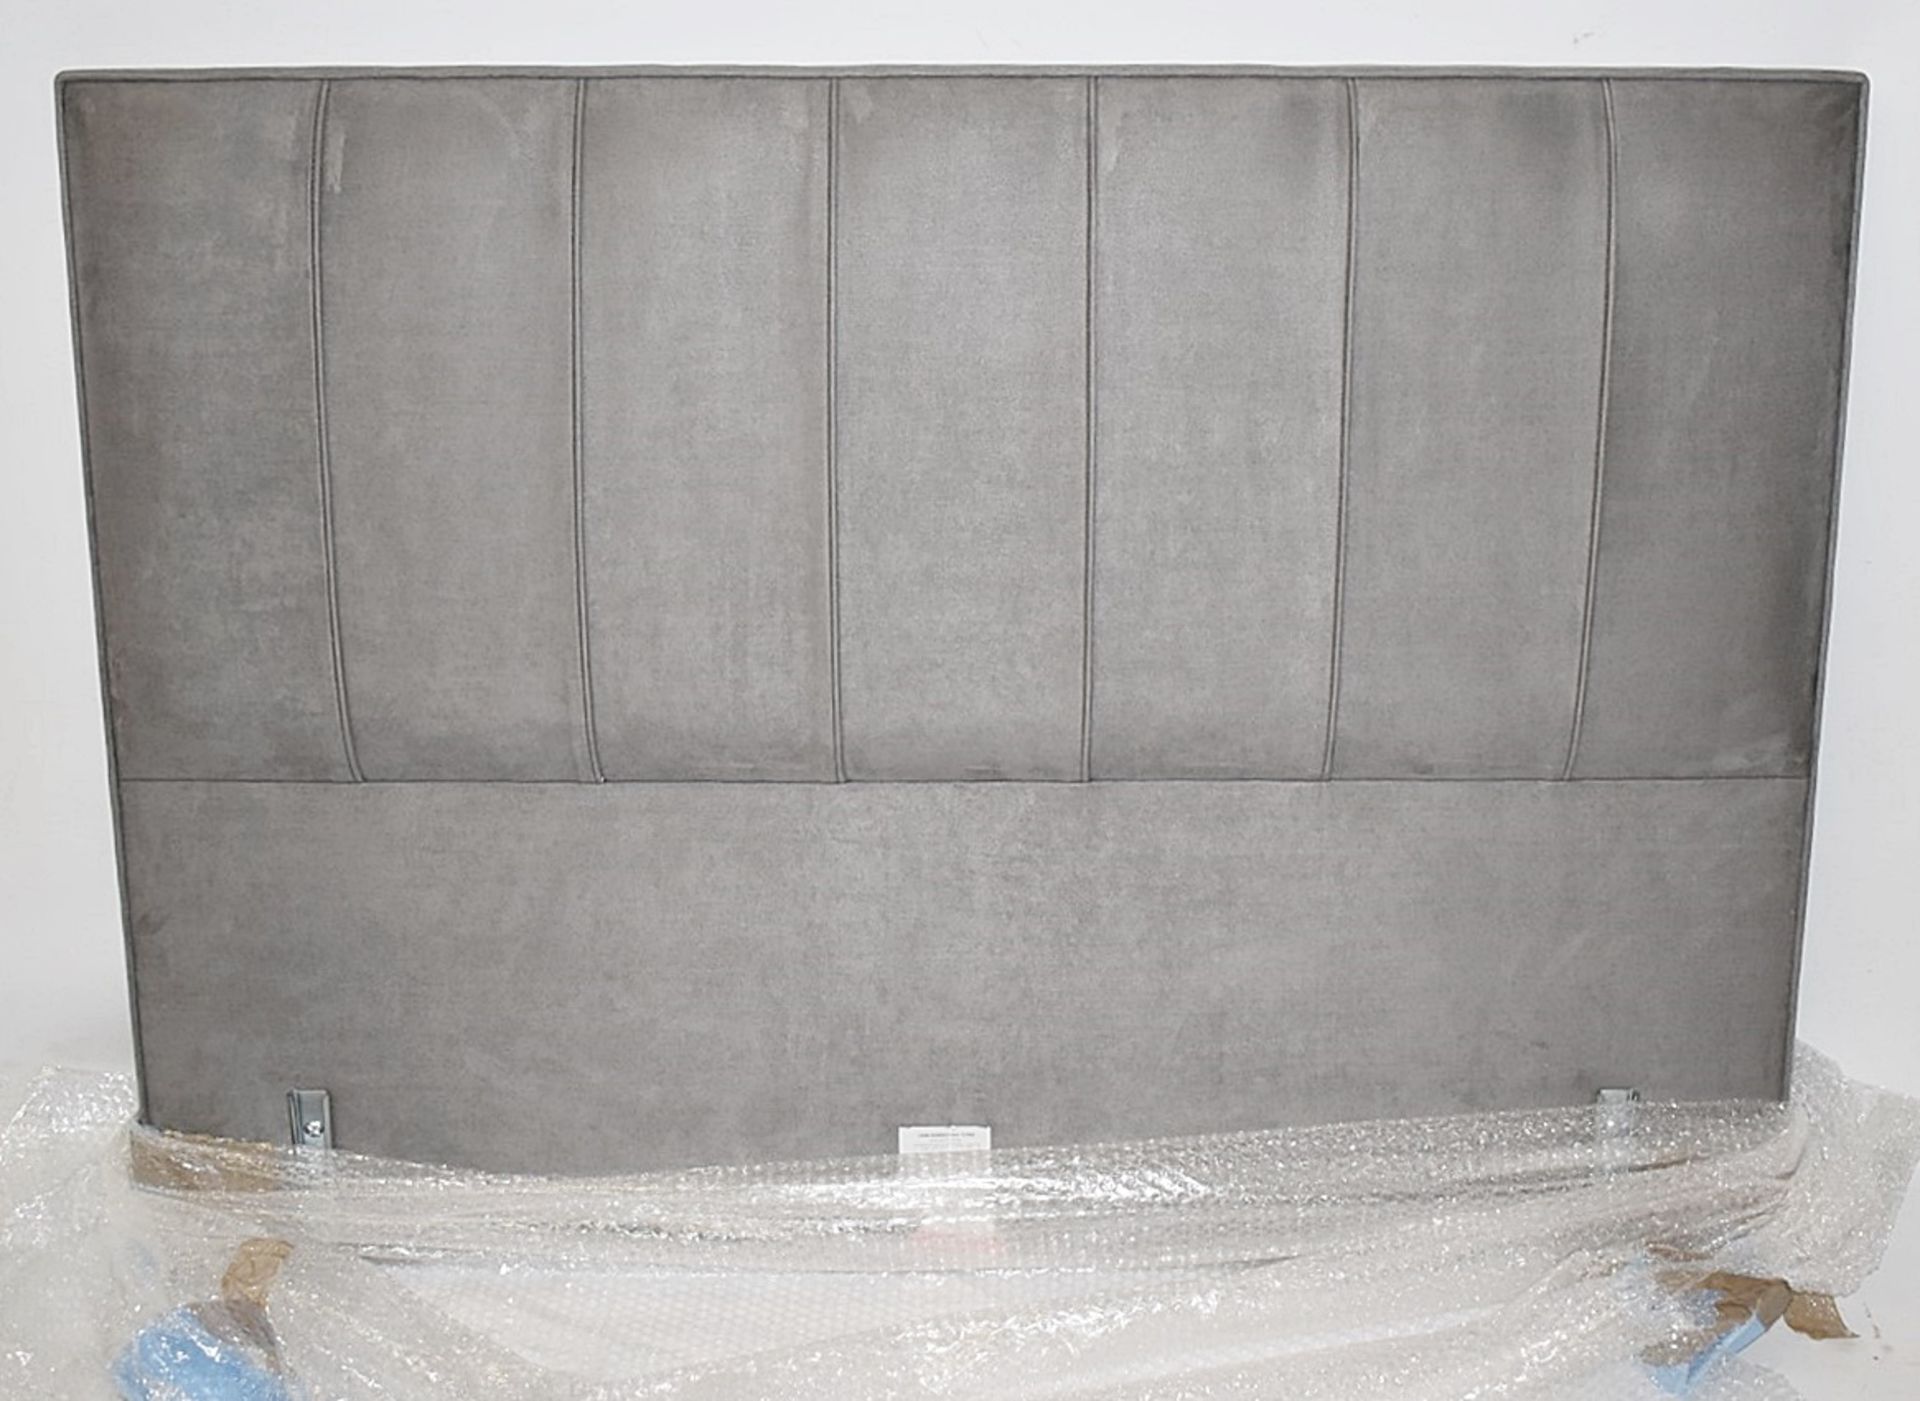 1 x VISPRING 'Hera' Luxury Handcrafted Double Headboard In A Grey Faux Suede - British Made - Image 2 of 6